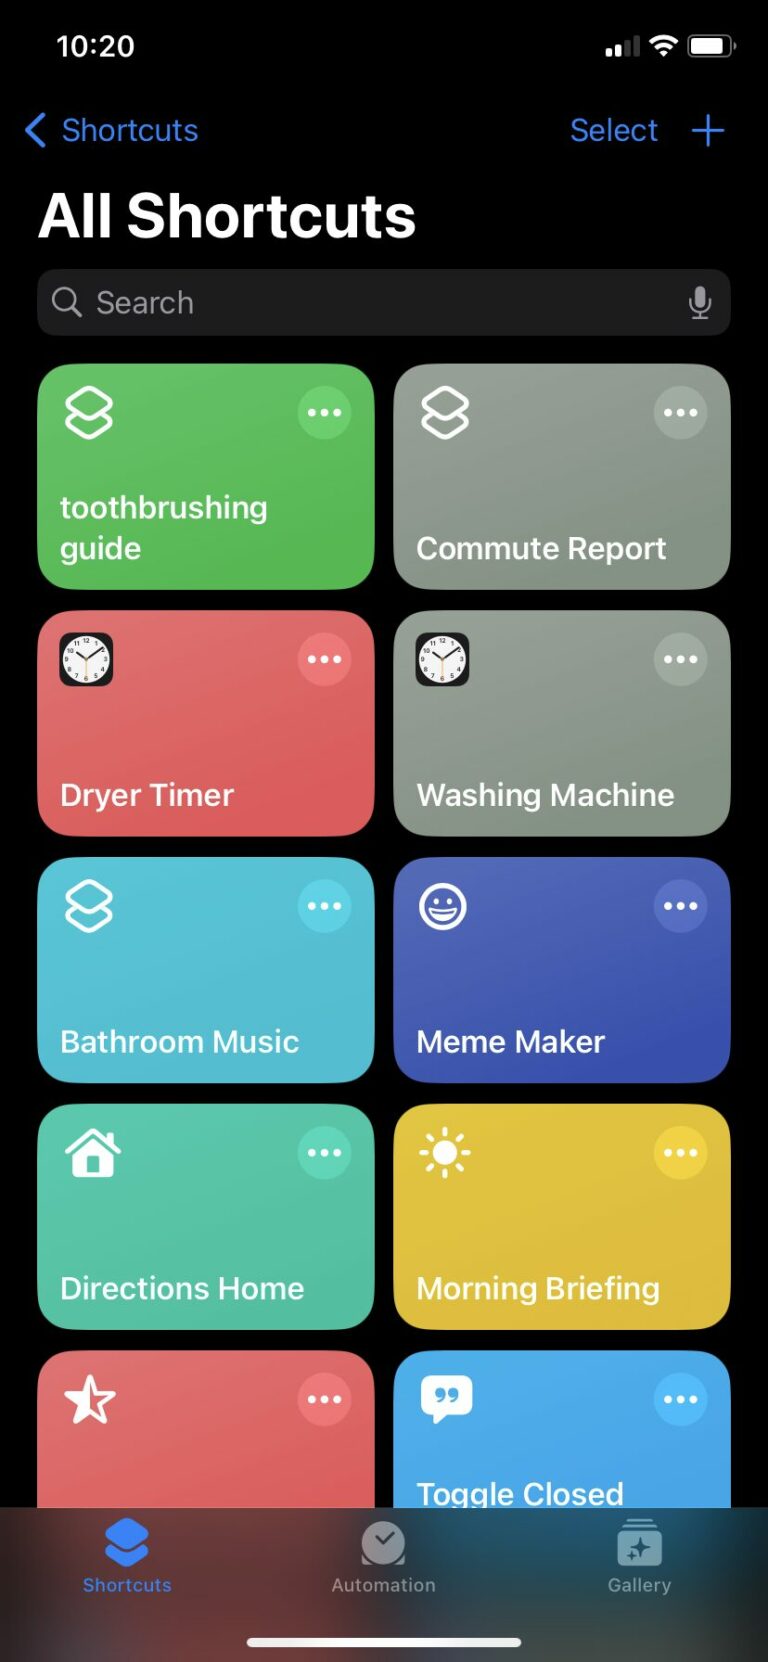 The Apple shortcuts home screen